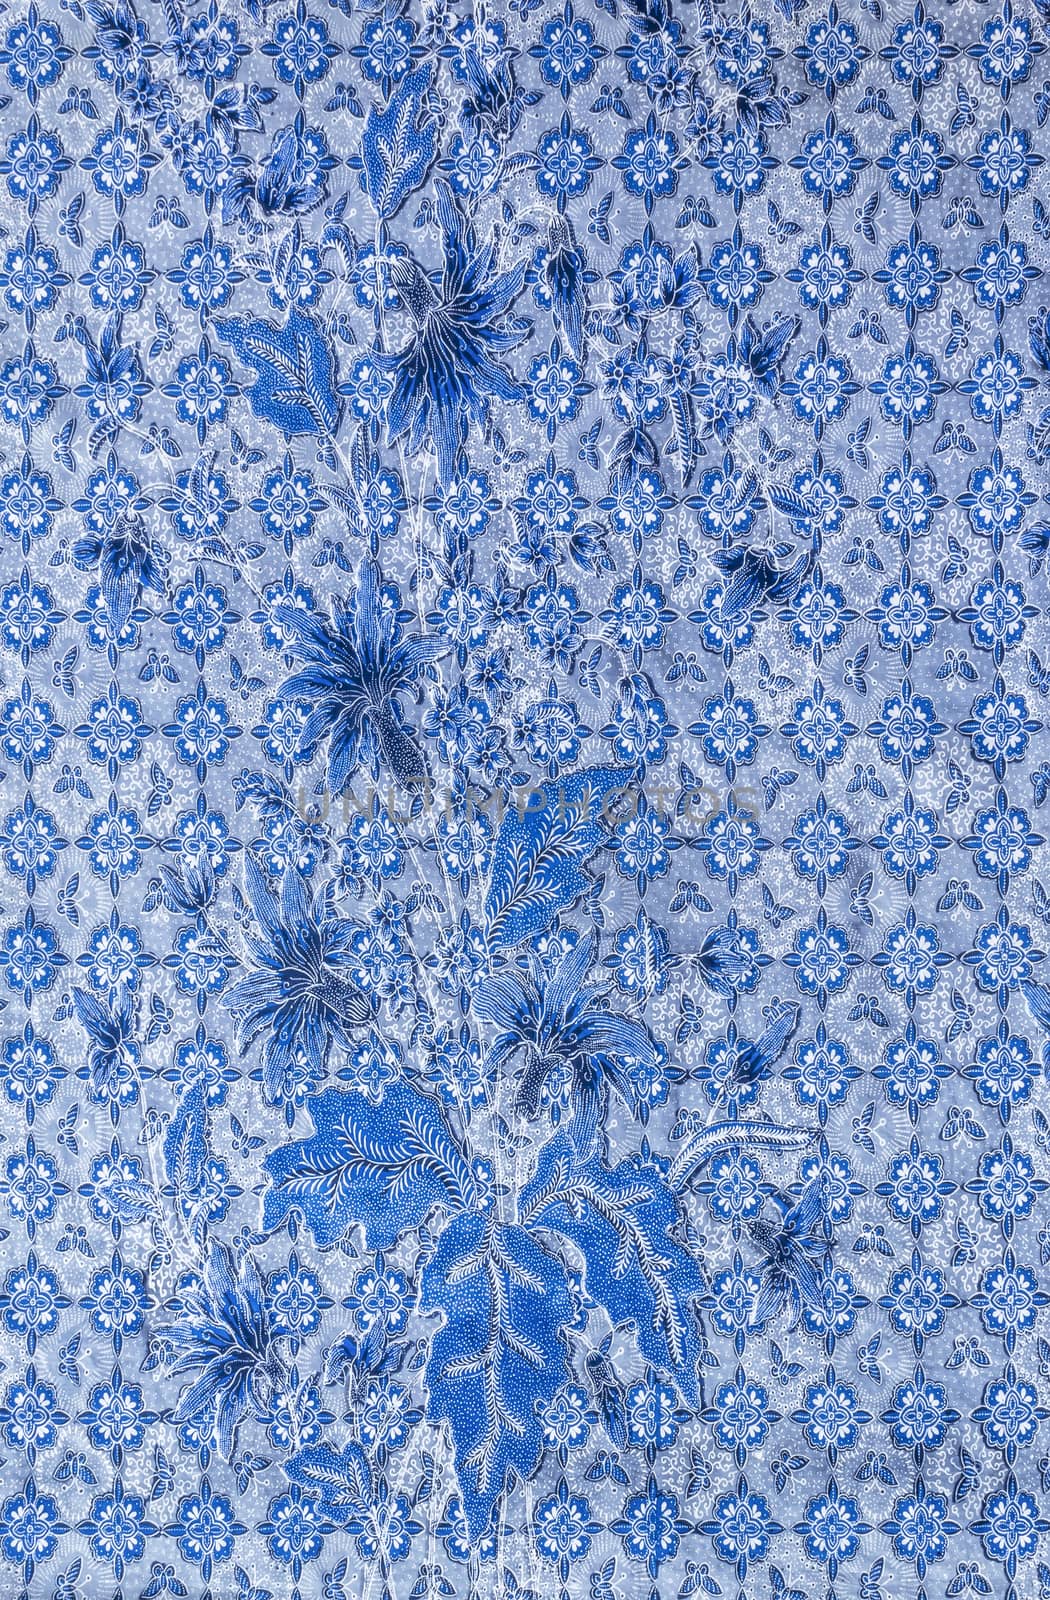 Blue flowers and laef on fabric pattern background